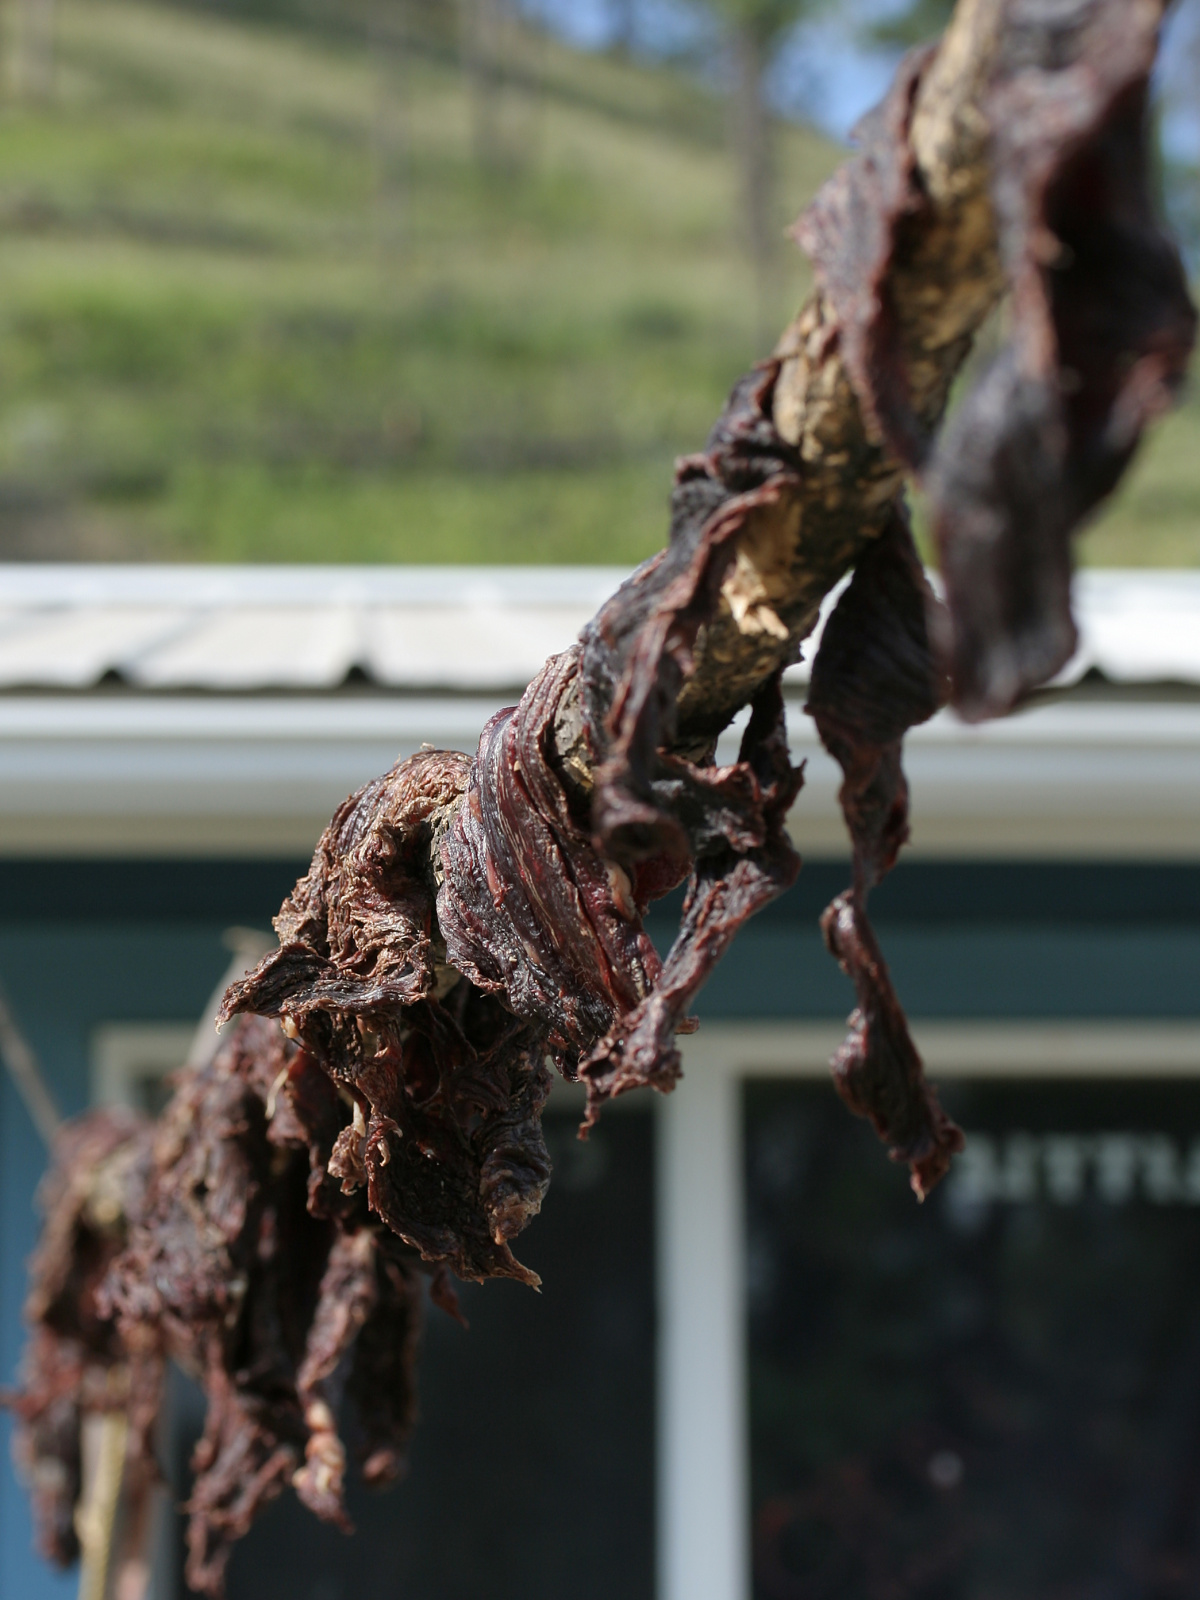 Dry Buffalo Meat (Travels » US Trip 1: Cheyenne Country » misc)